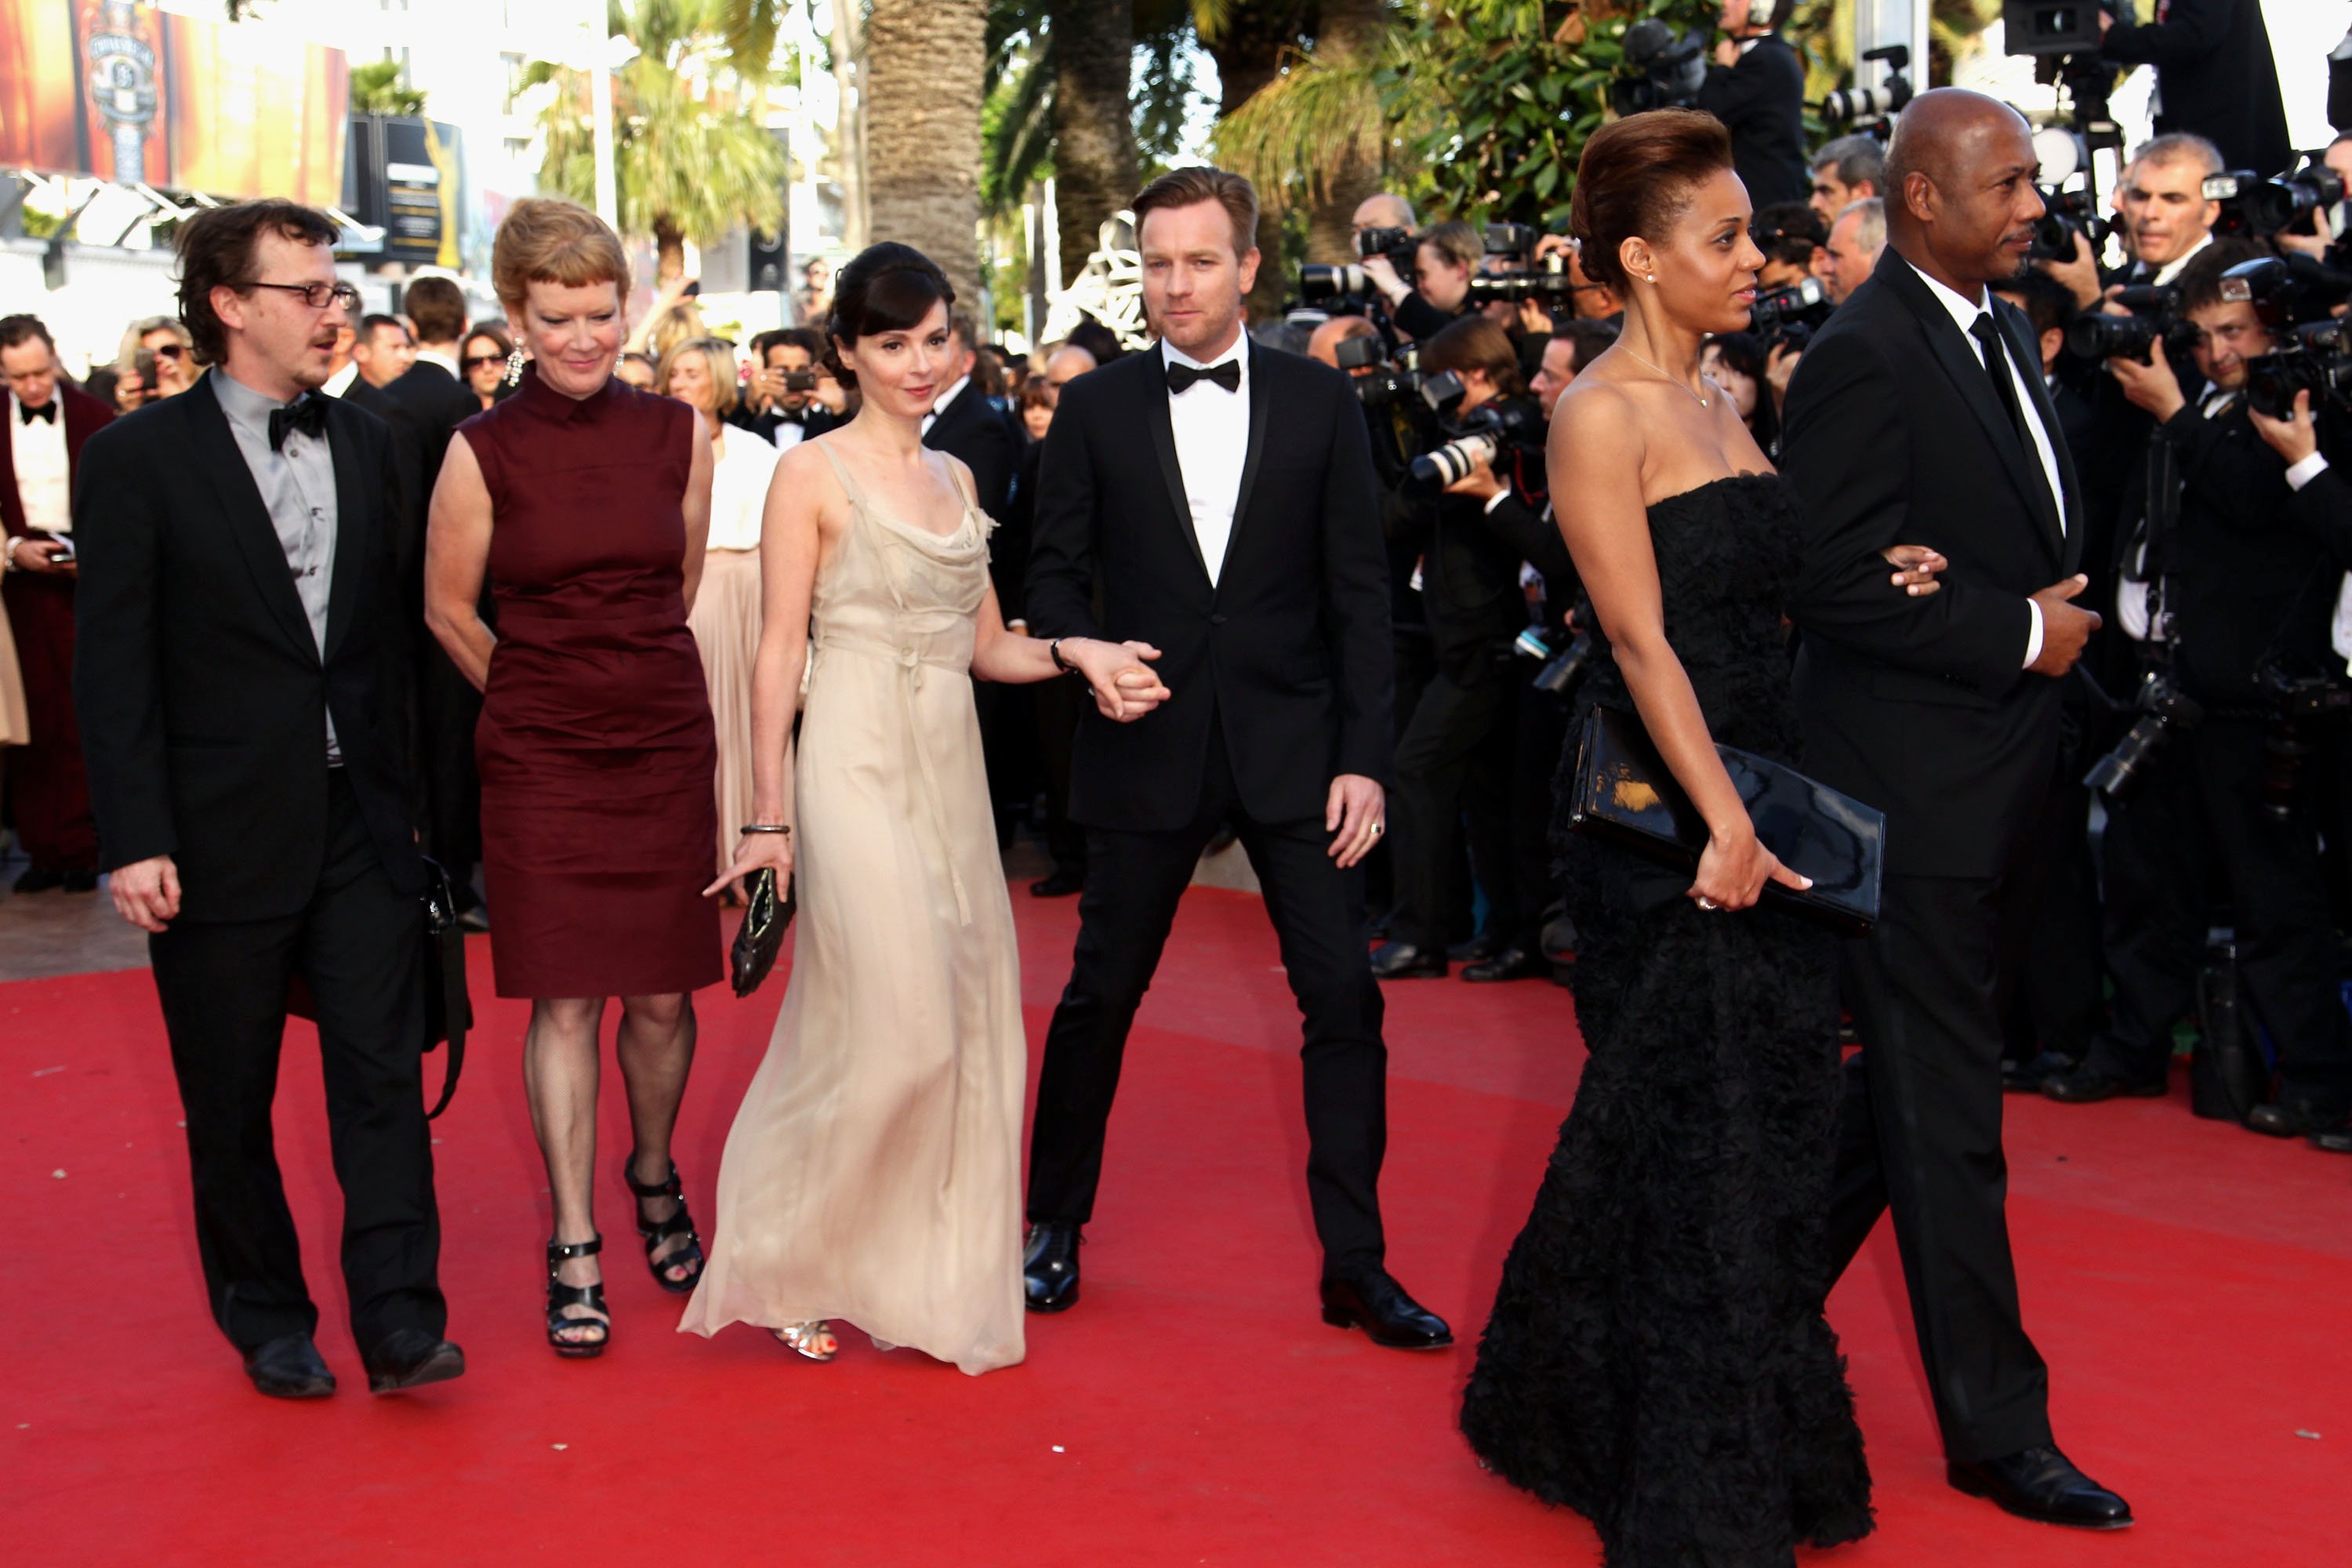 2012-05-23-Cannes-Film-Festival-On-The-Road-Premiere-007.jpg